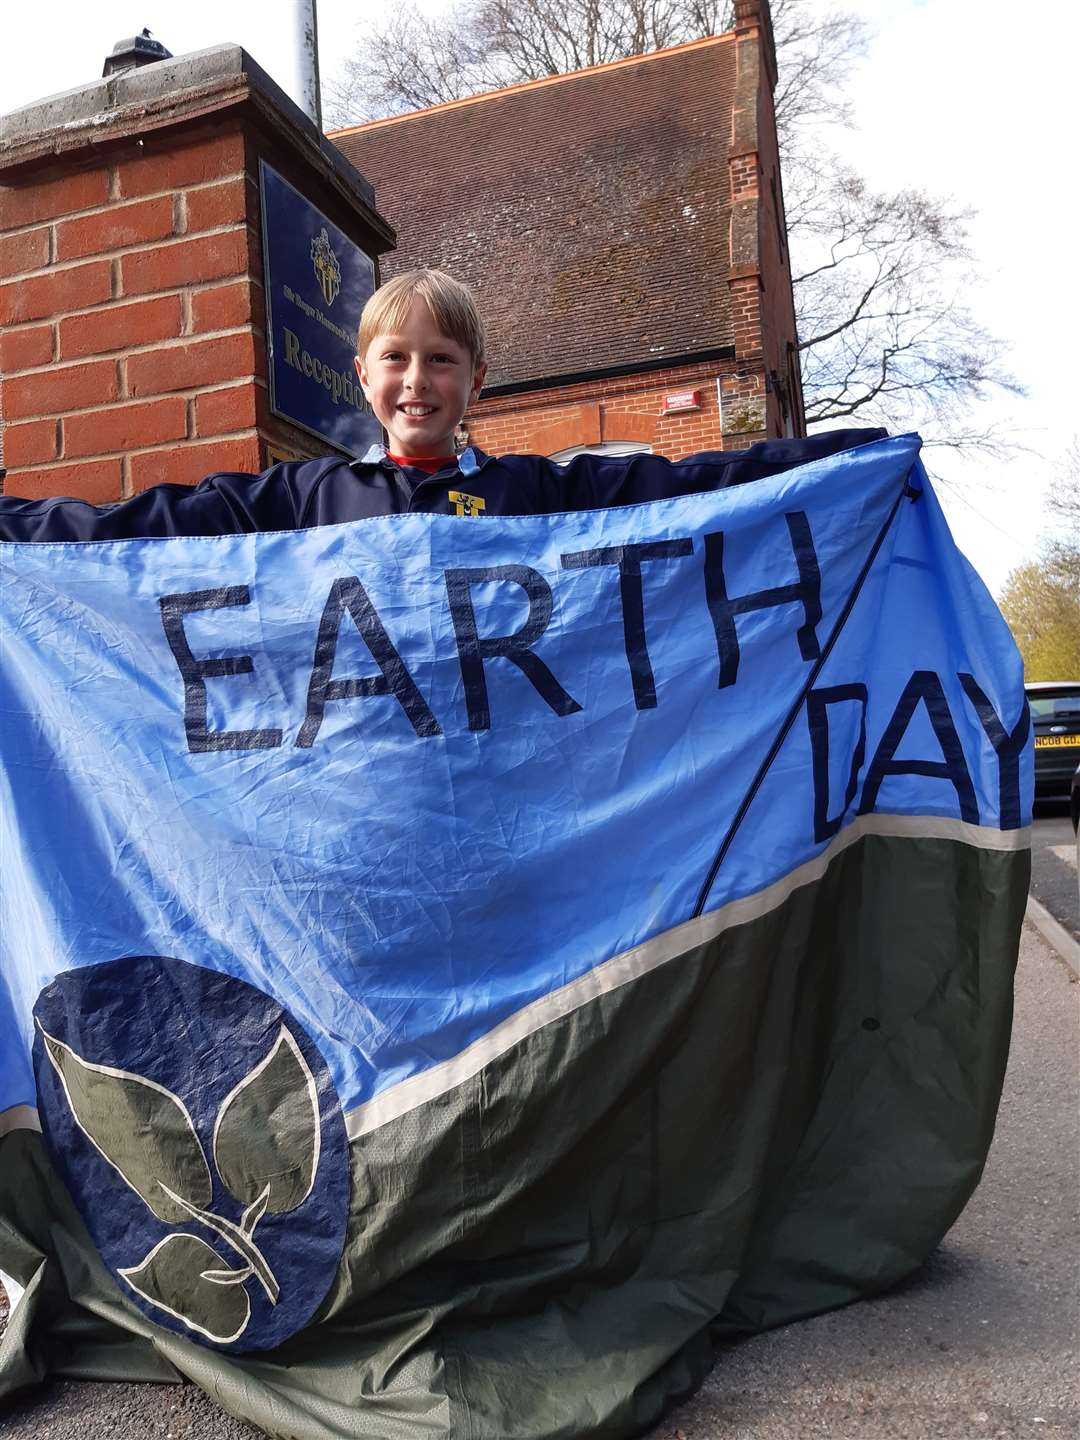 Year 7 year pupil Joshua designed Sir Roger Manwood's School's Earth Day flag as the school comes out in support of the environment